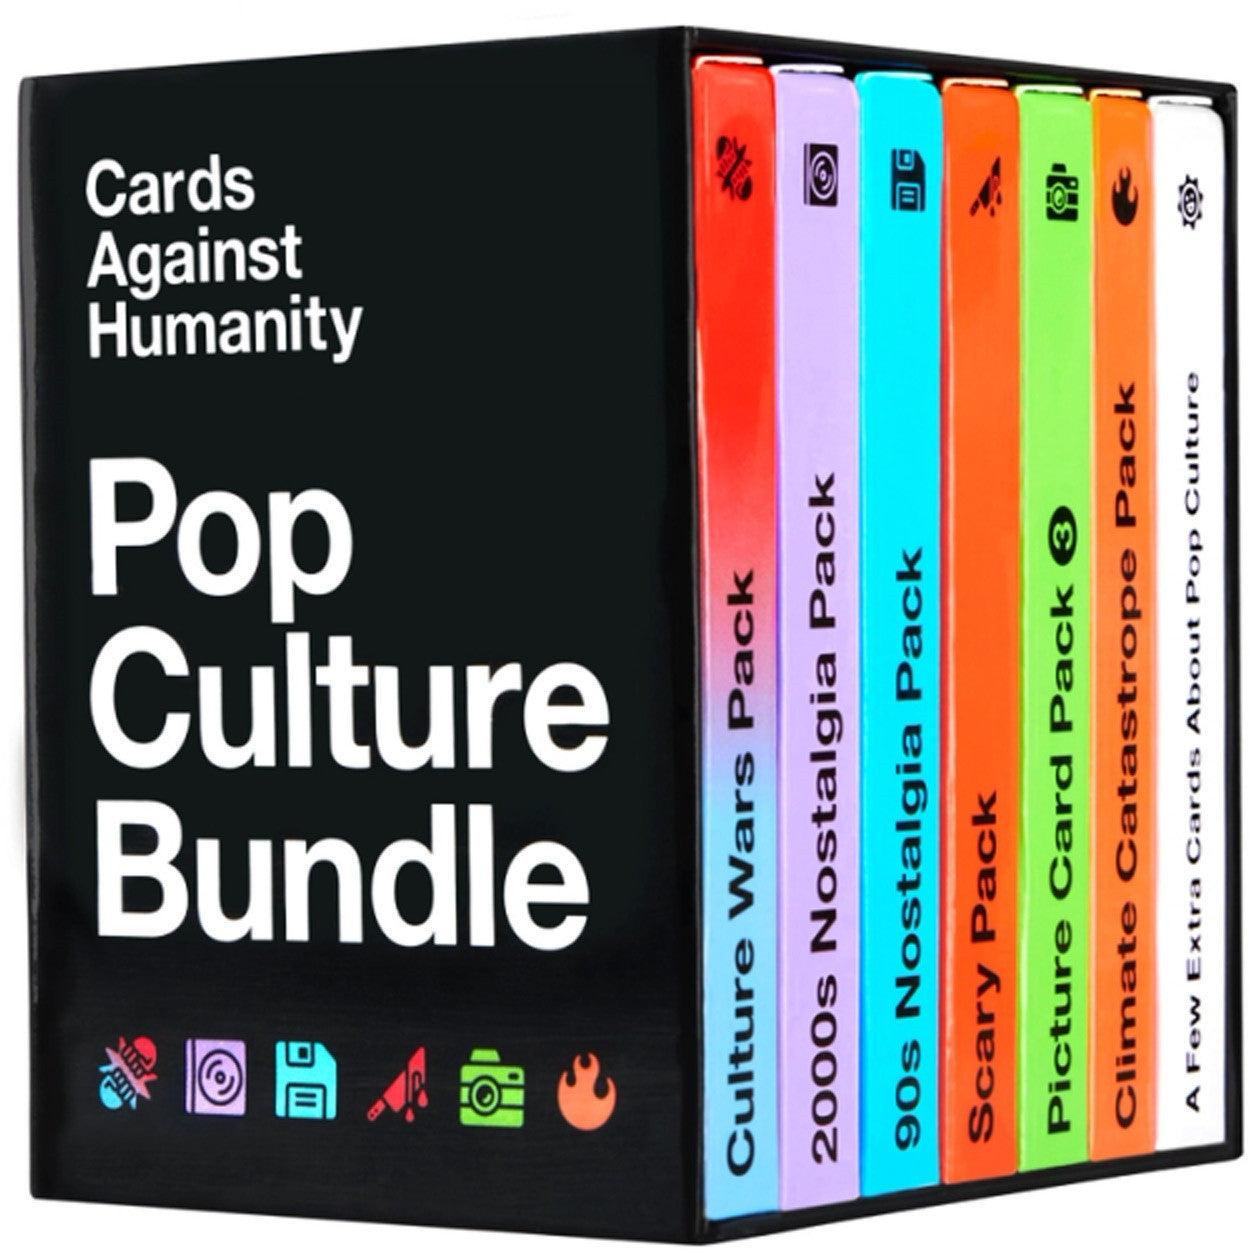 Cards Against Humanity Pop Culture Bundle Expansion (Do not sell on online marketplaces)